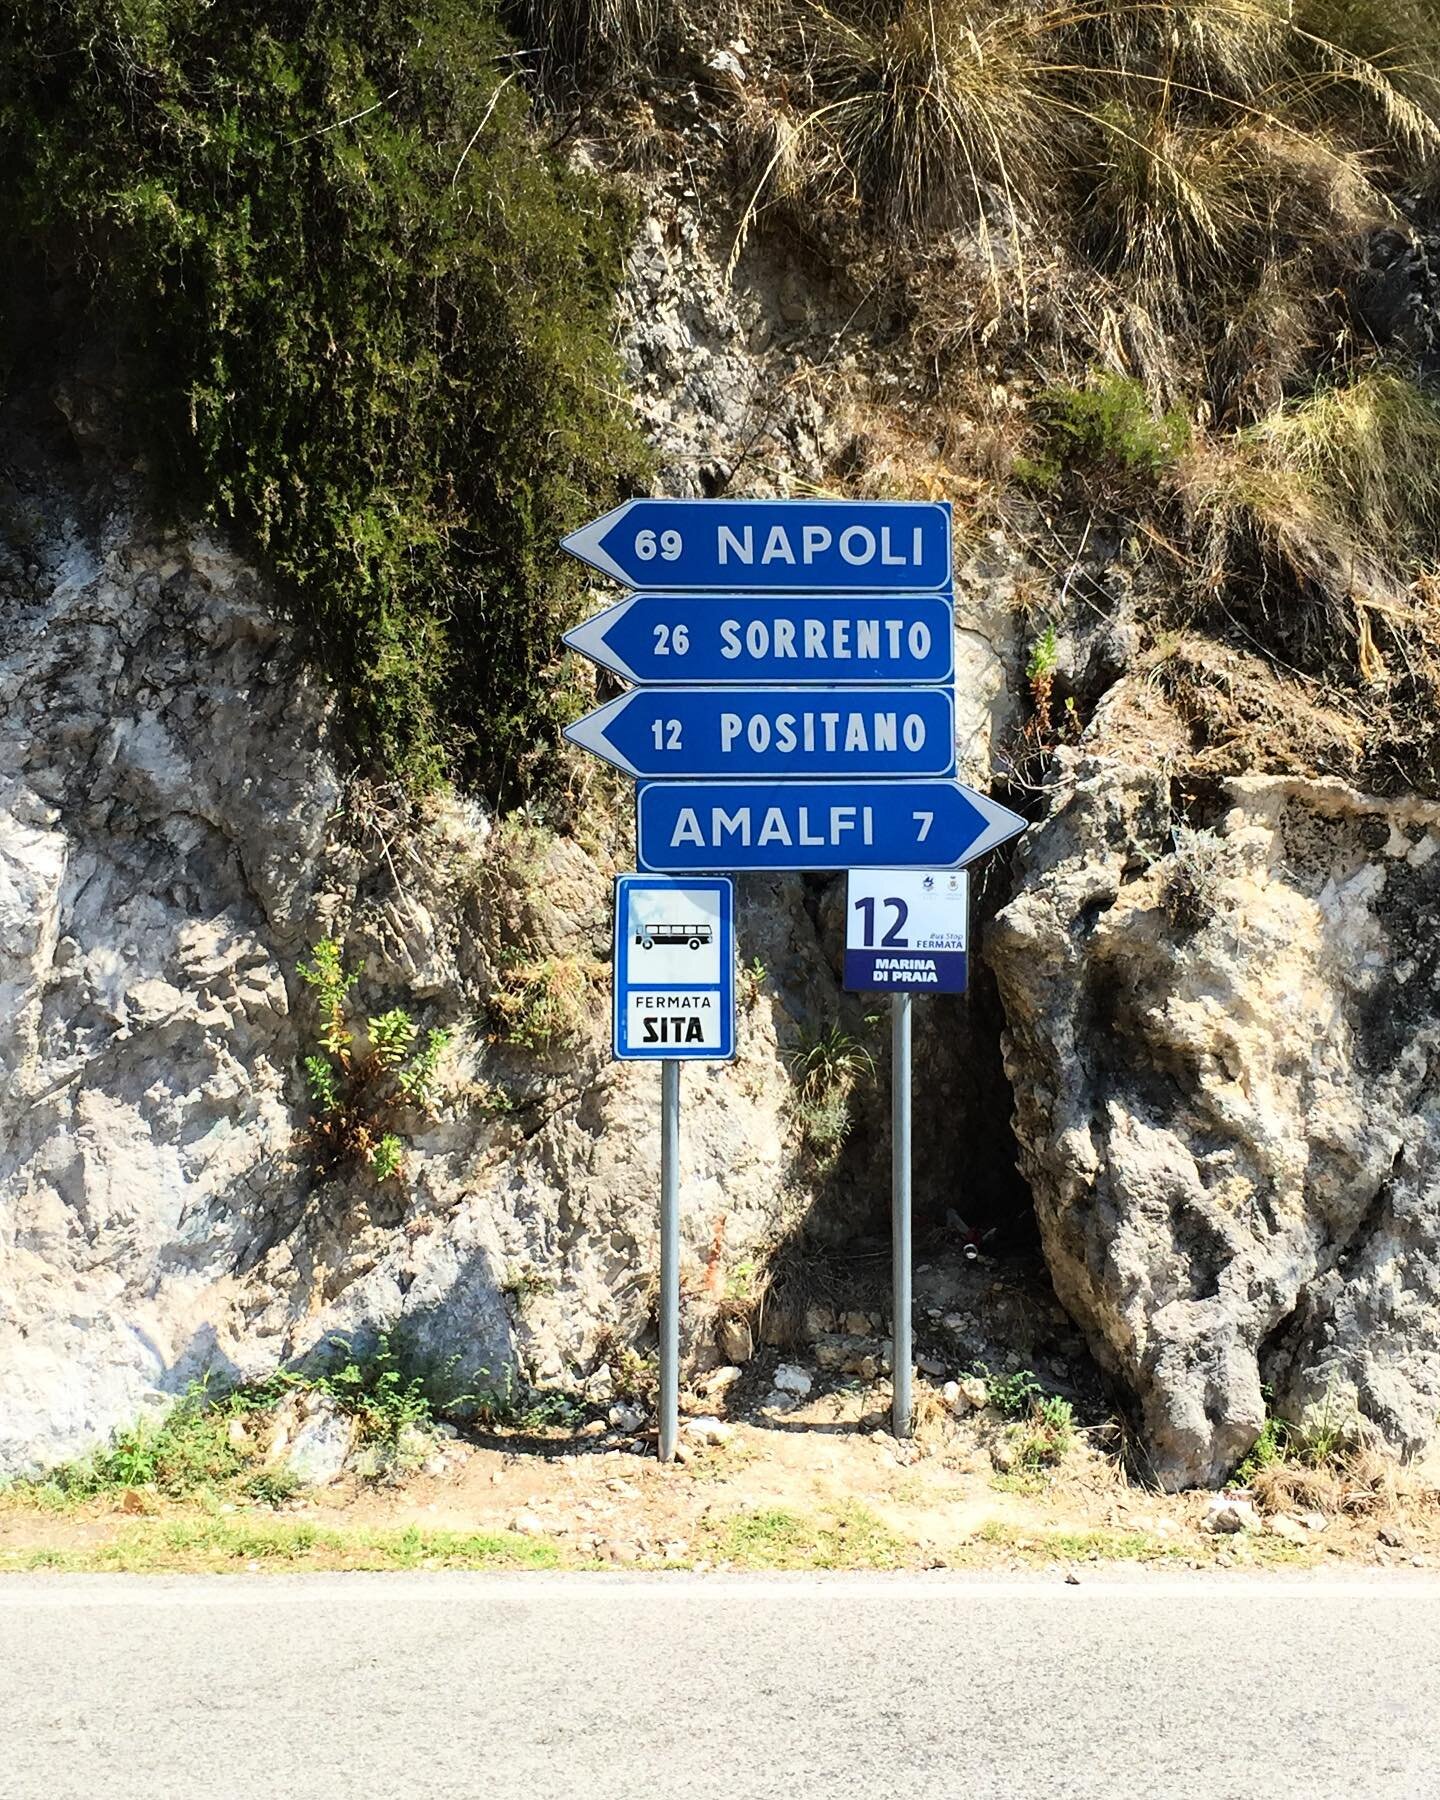 This is a really good sign. #goodsign #italy #amalficoast #furore